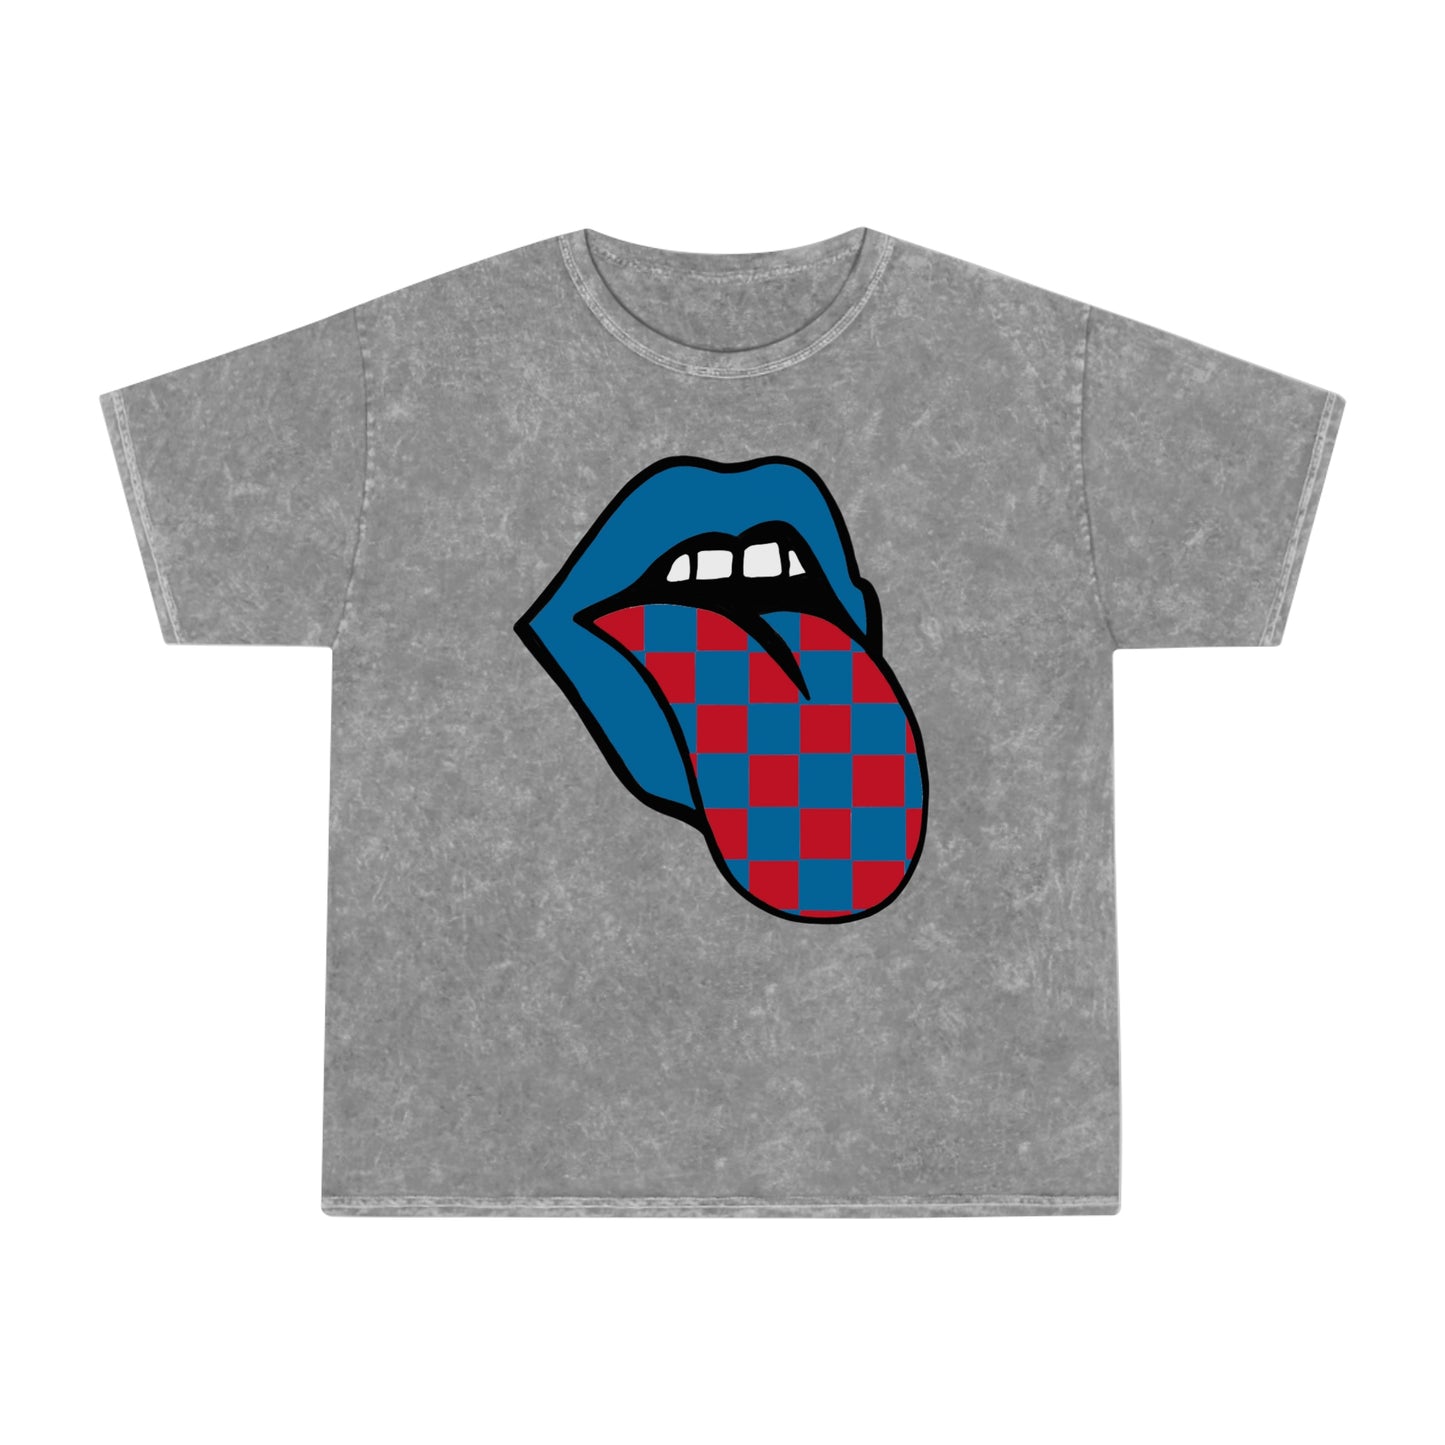 Red/Blue Retro Tongue Tee -  Large - 2XL - GG